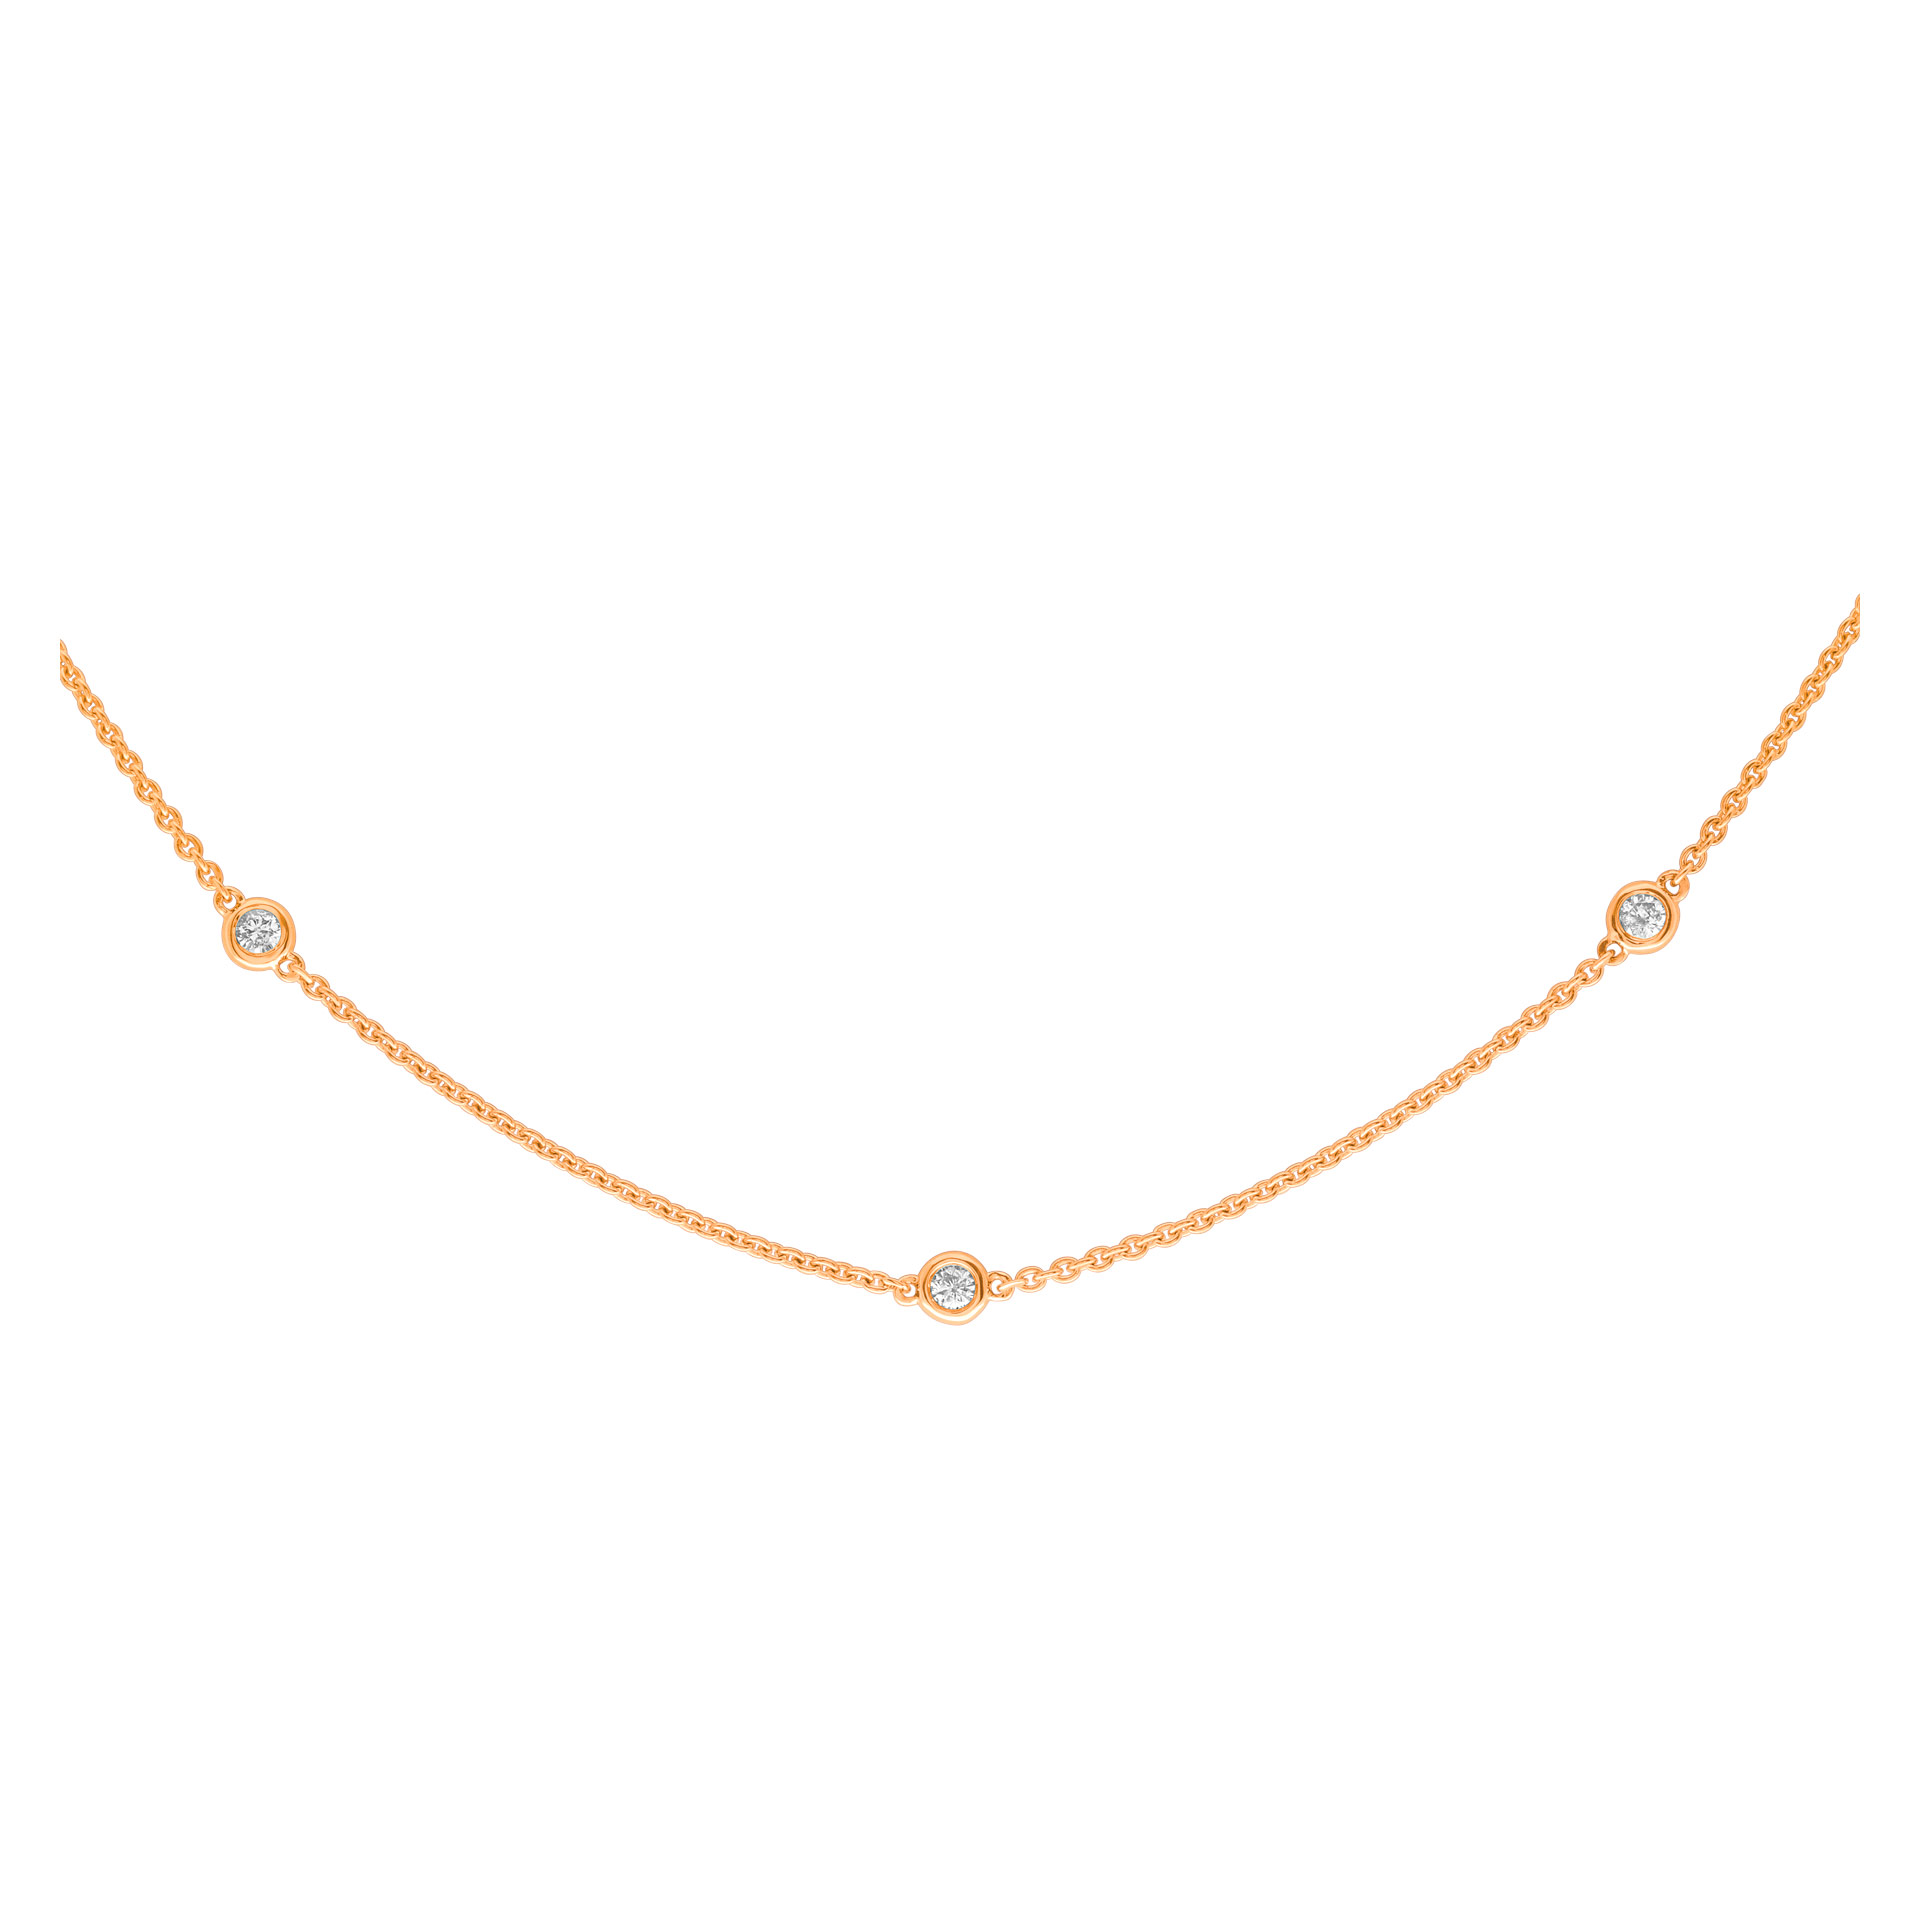 Diamonds by the yard 14k rose gold 1.05 carats in diamonds